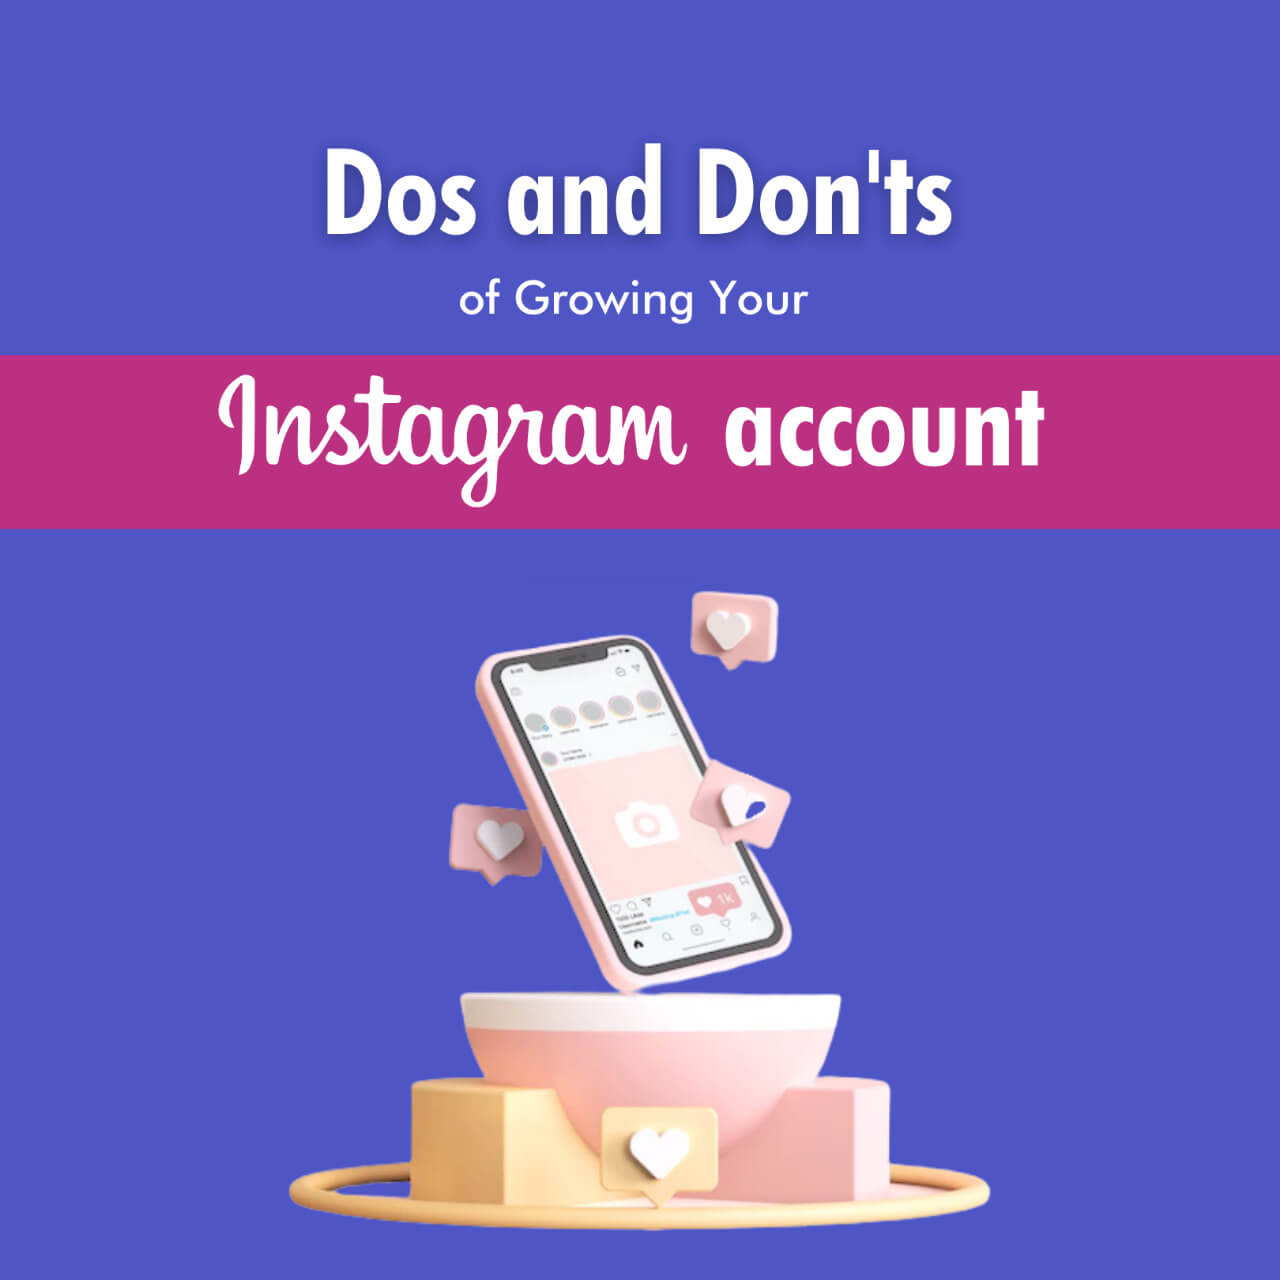 Dos and Don'ts of Growing Your Instagram Account